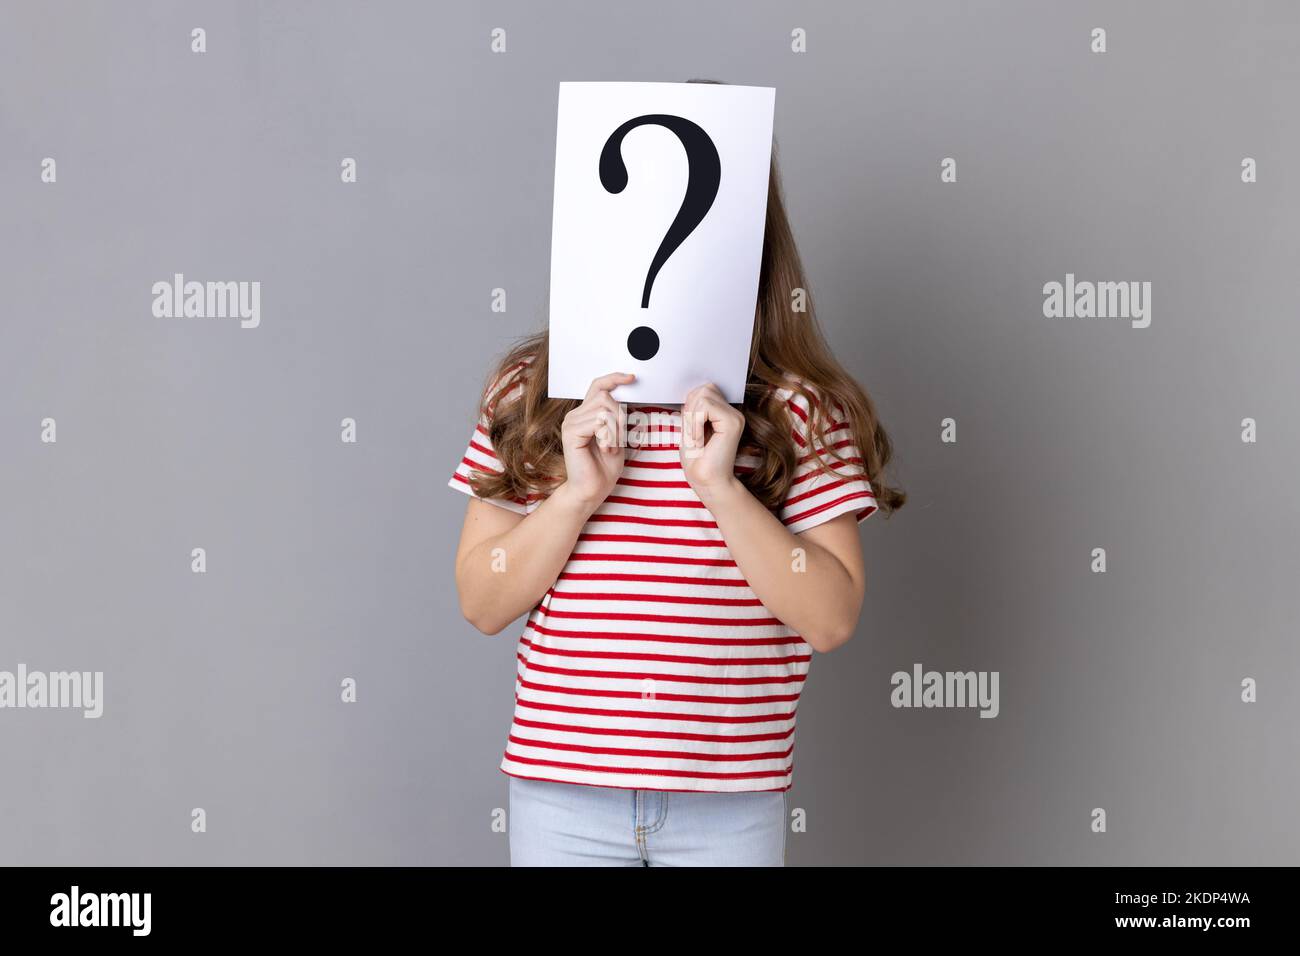 Portrait of unknown little girl wearing striped T-shirt standing hiding face behind paper with question mark, having problem for solving. Indoor studio shot isolated on gray background. Stock Photo